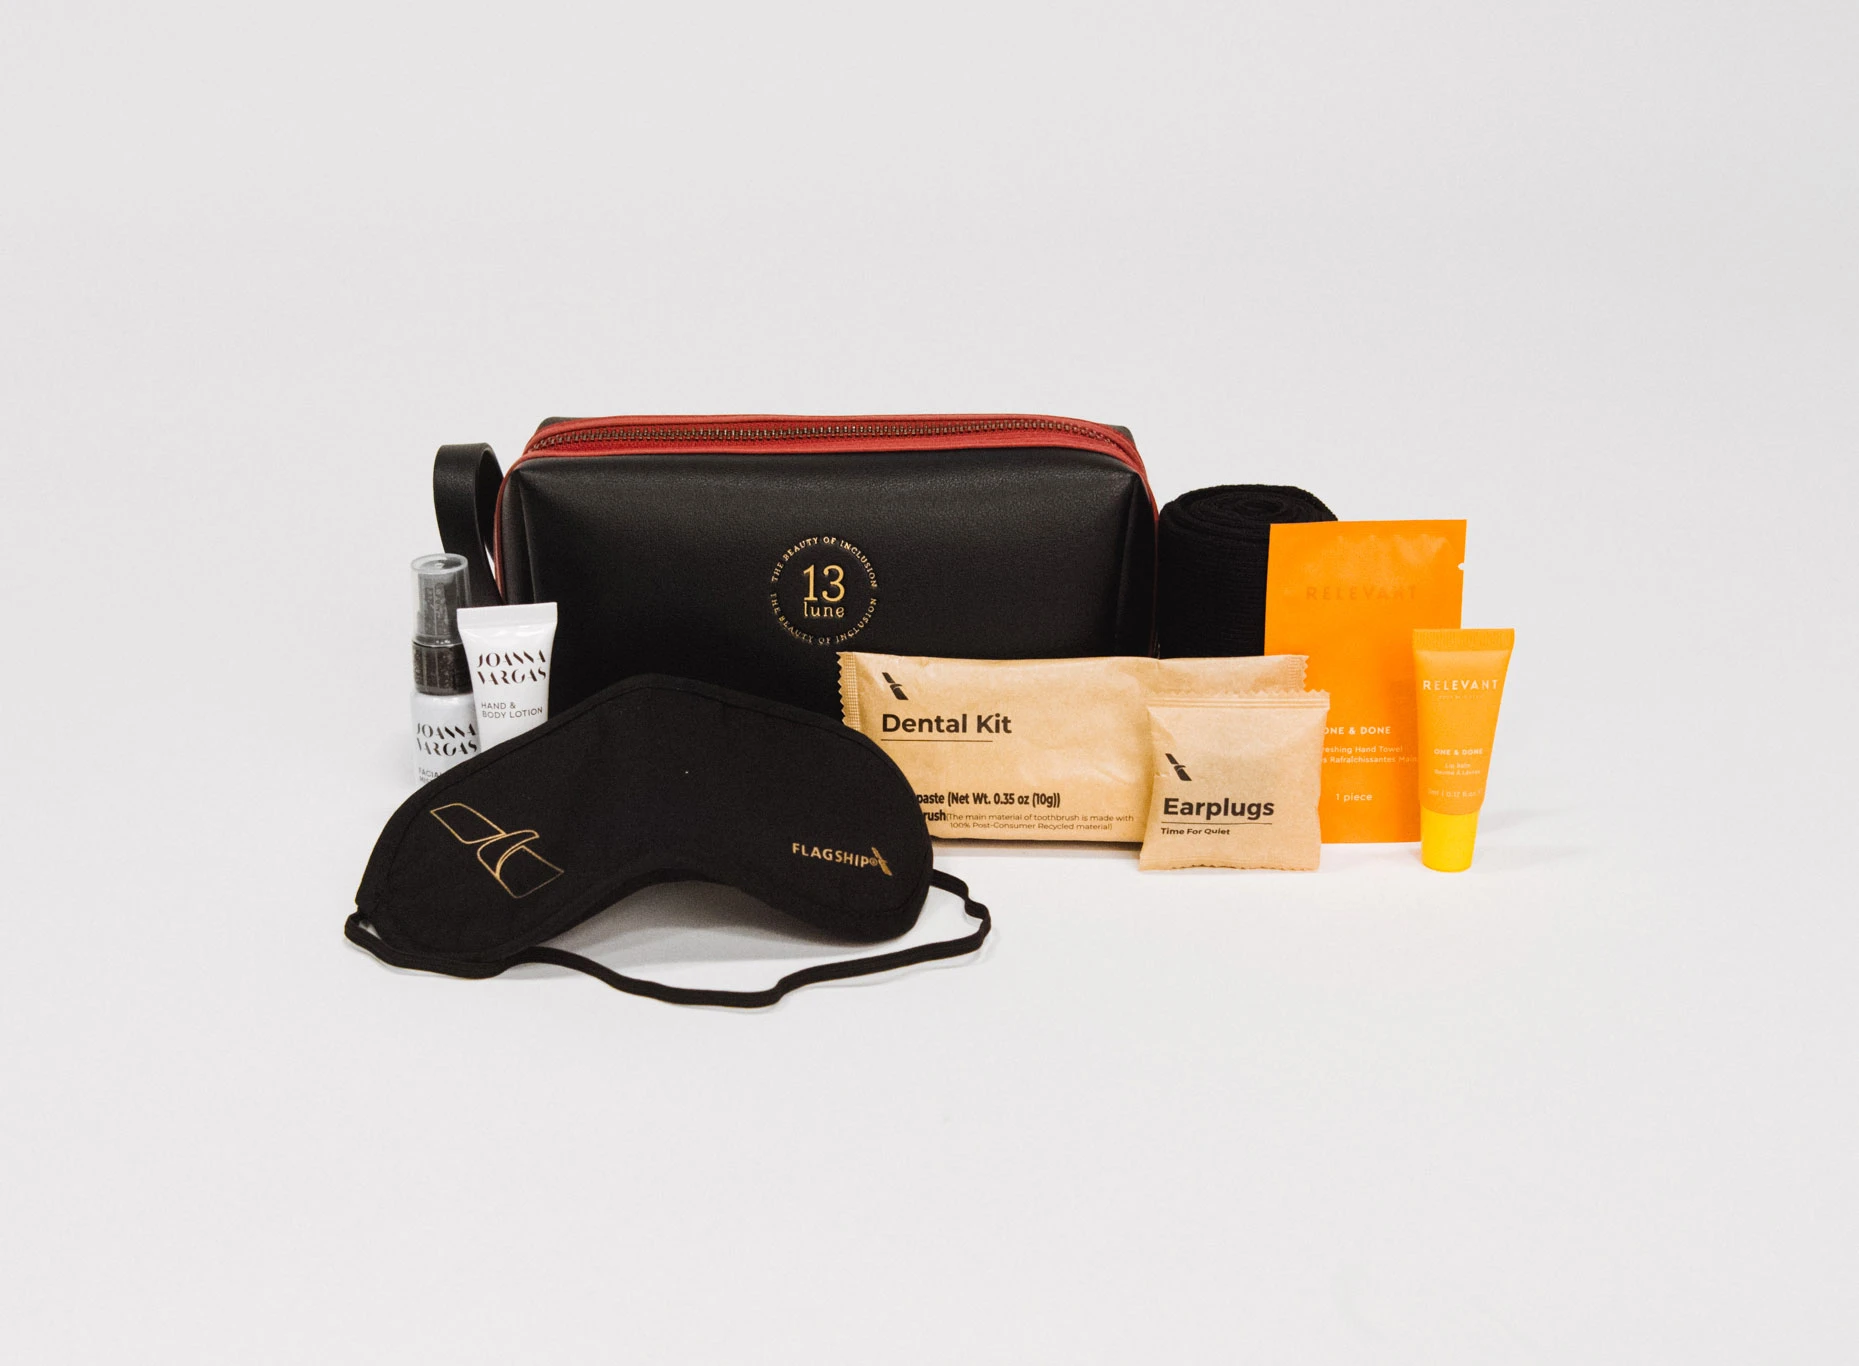 New Rotating Amenity Kits from American Airlines